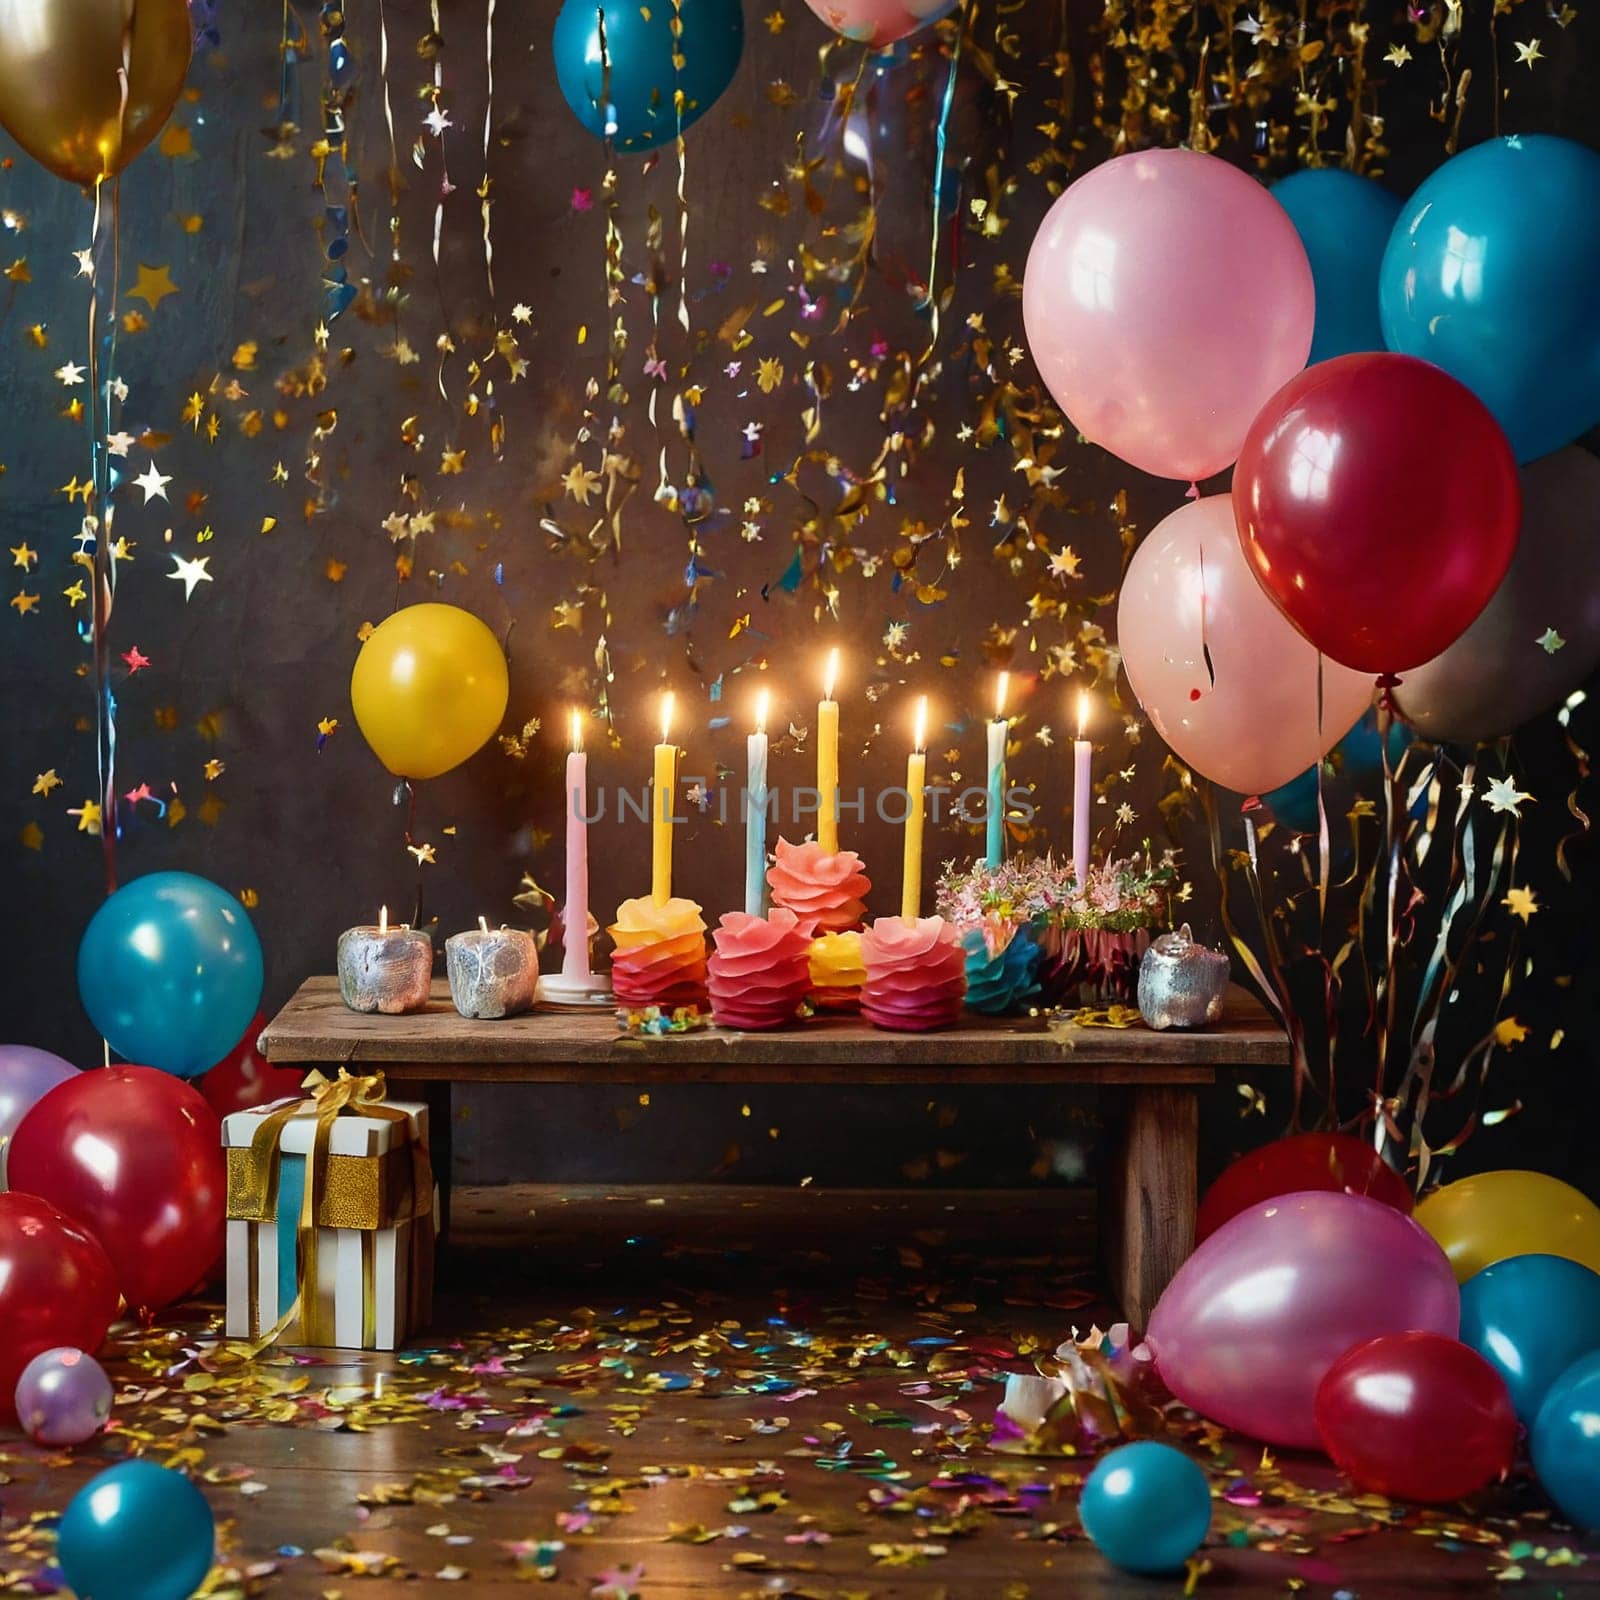 Lots of colorful festive balloons and confetti. High quality photo.